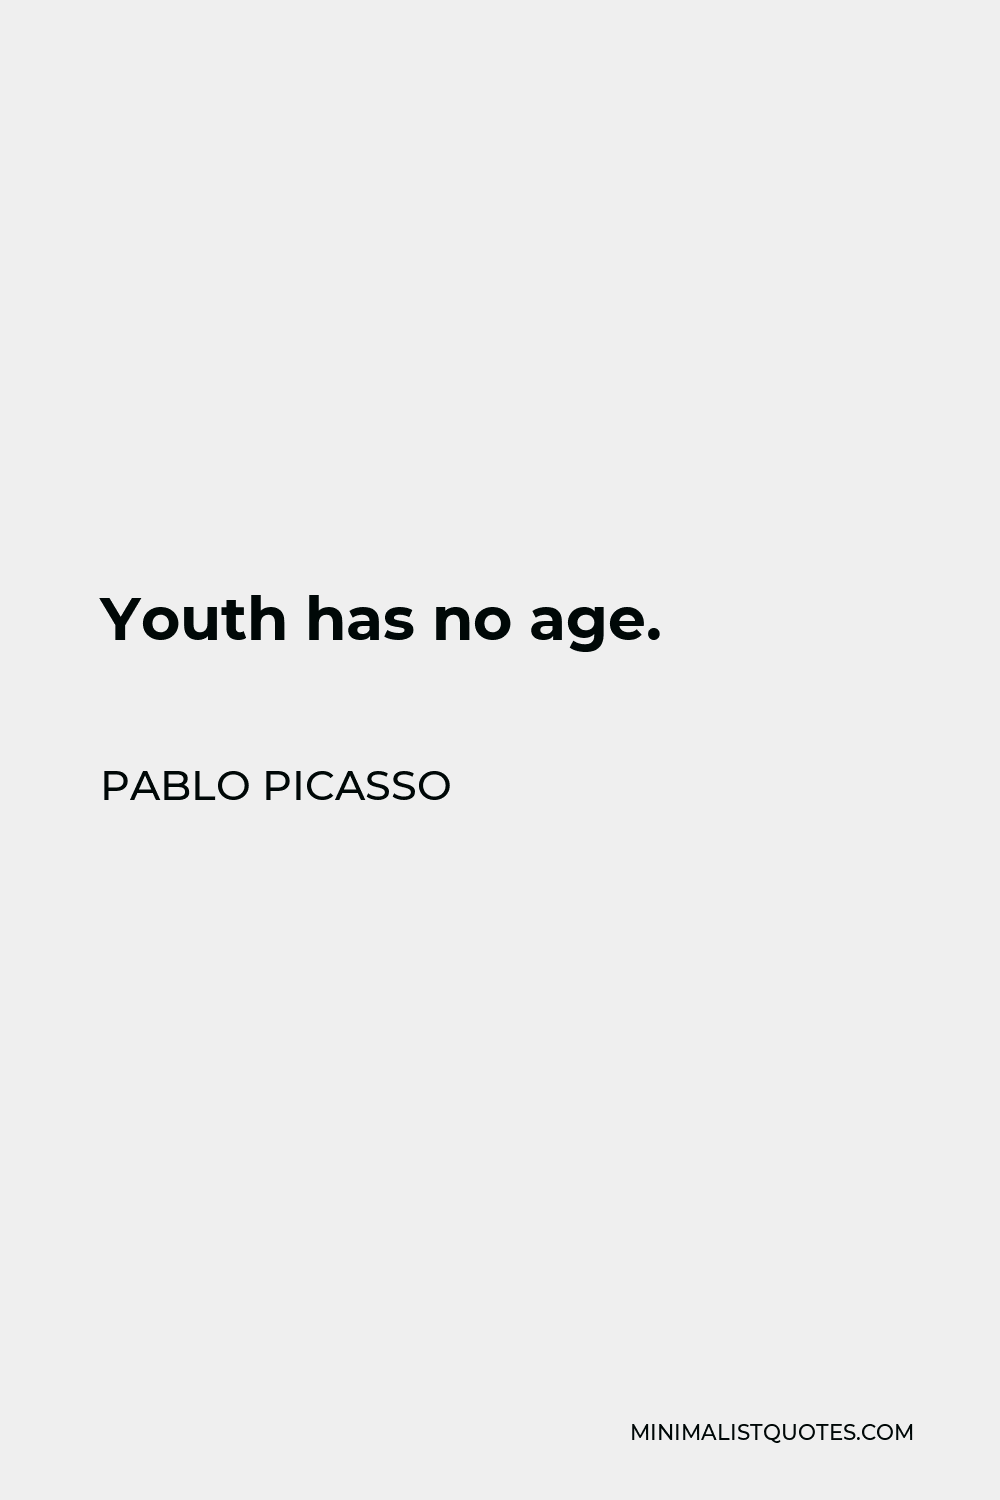 Pablo Picasso Quote - Youth has no age.